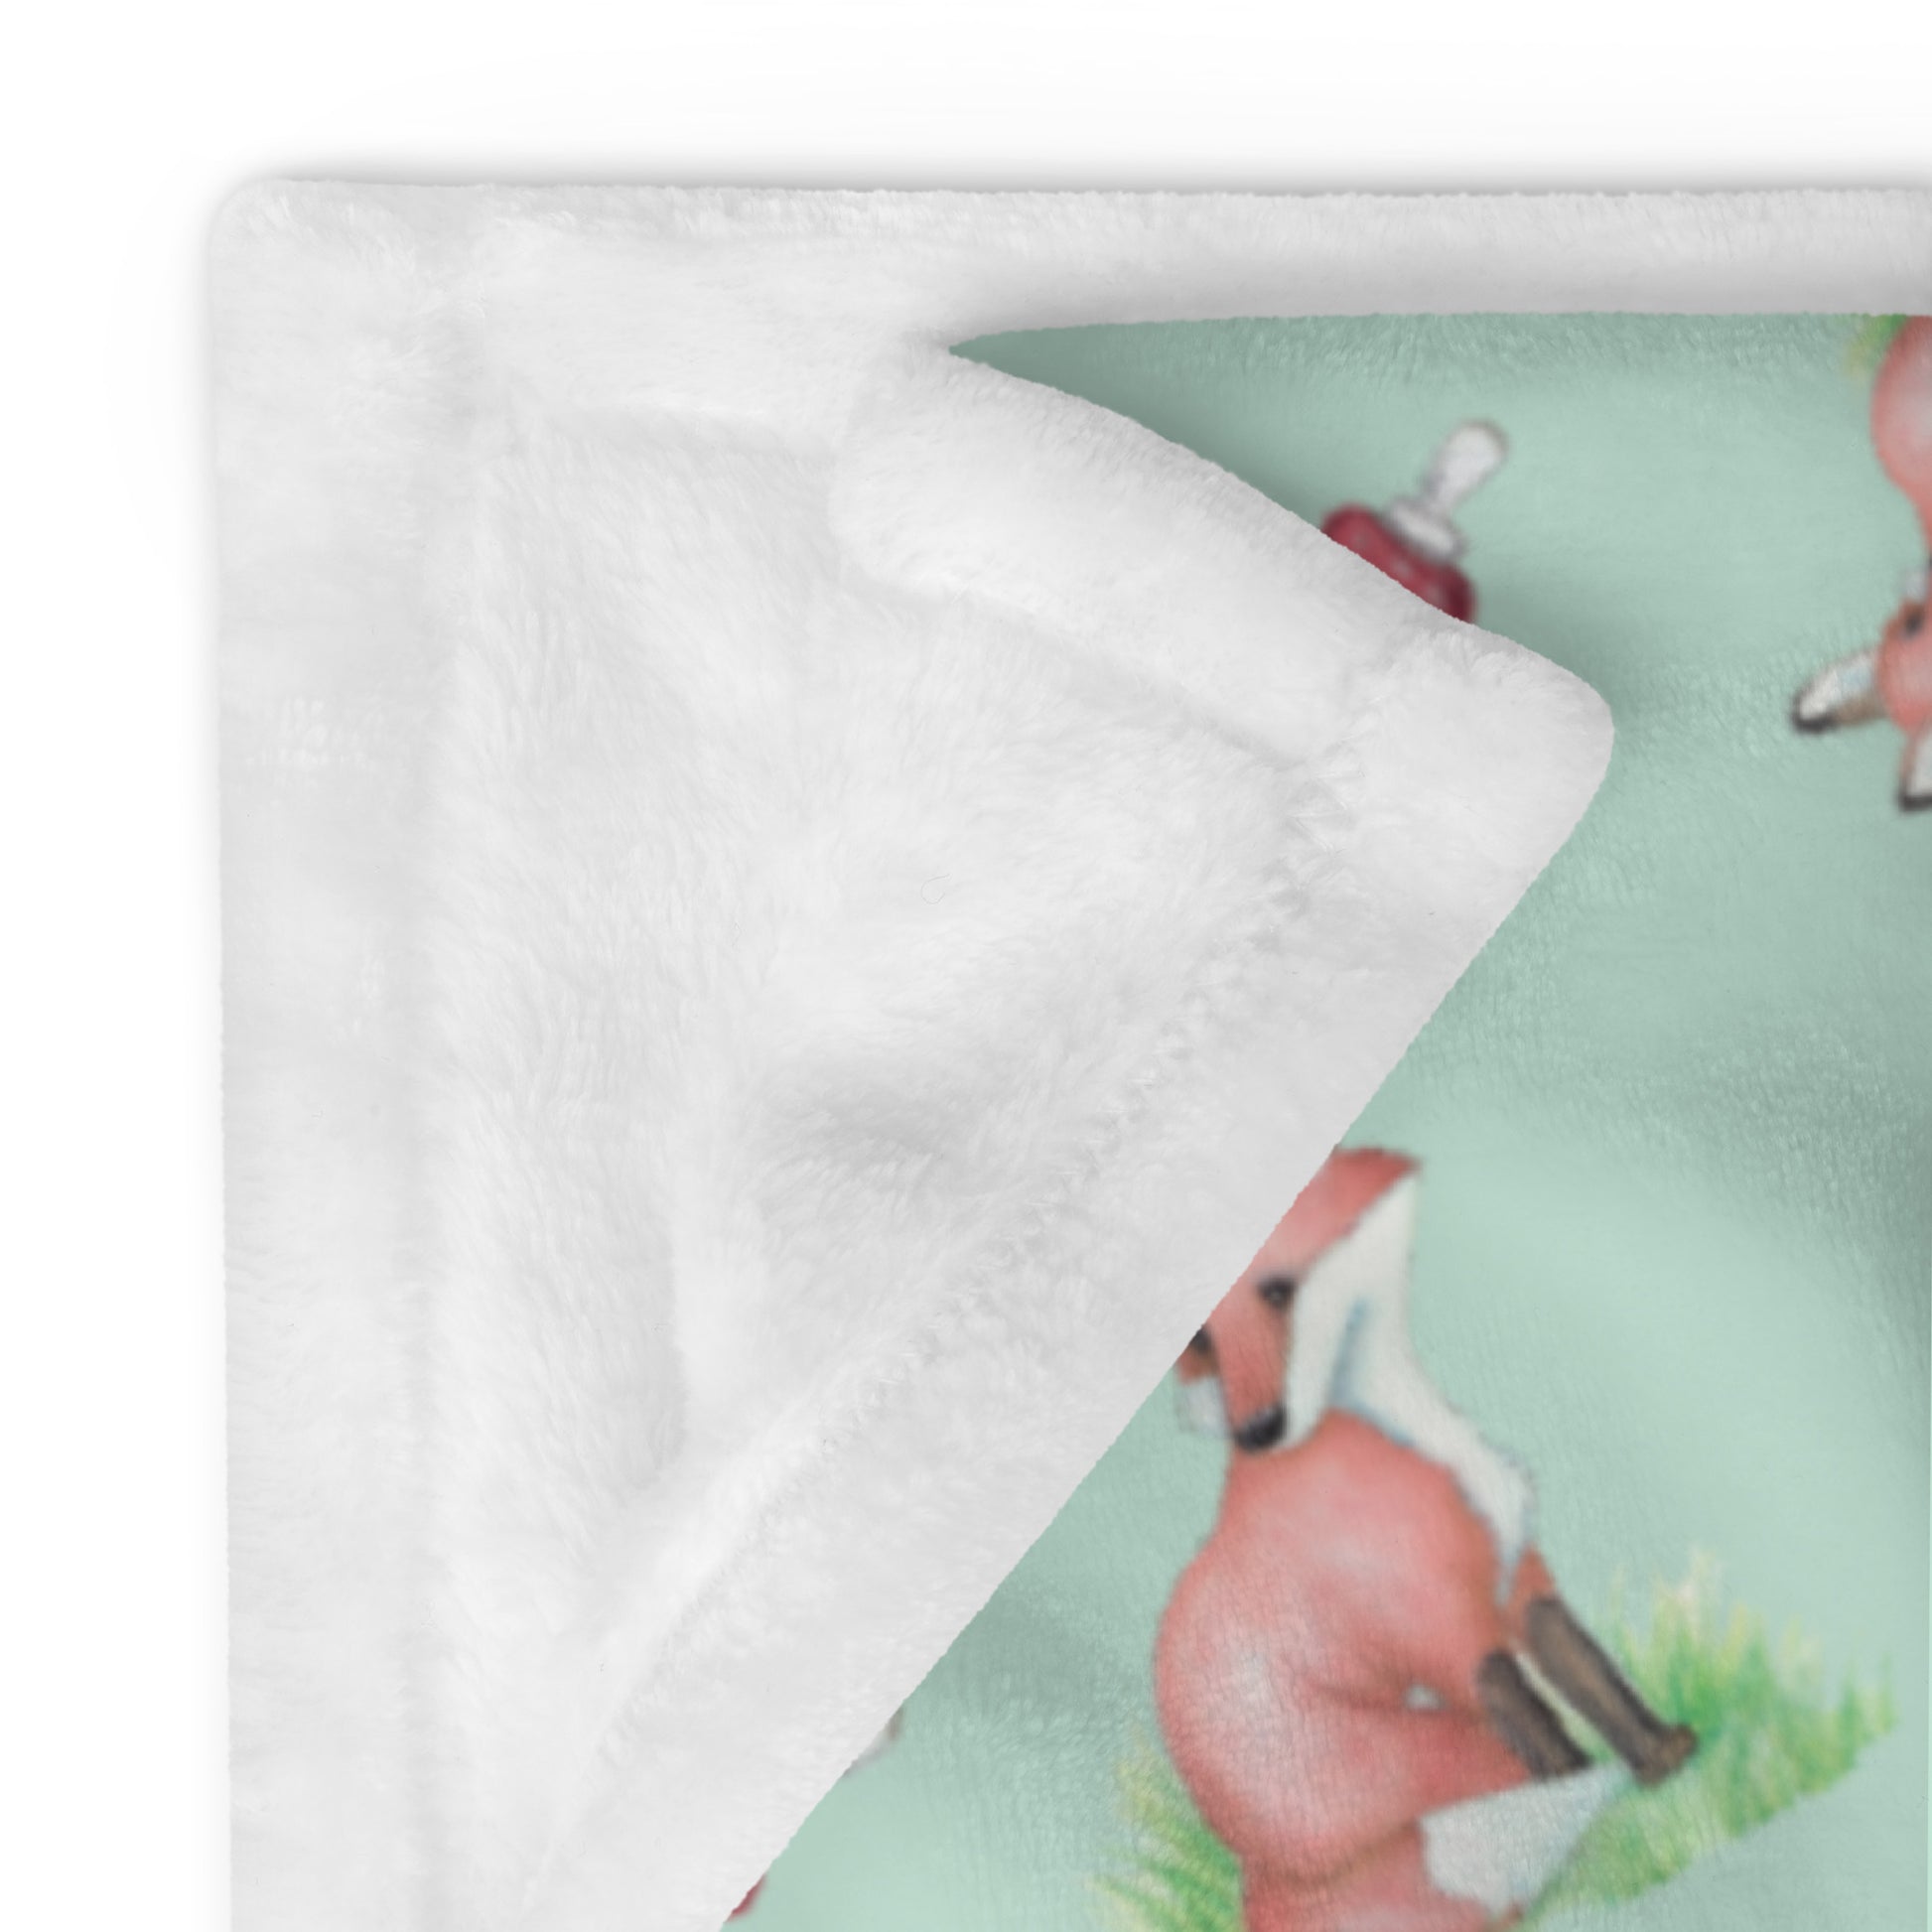 60 by 80 inch watercolor forest fox patterned blanket. Made of soft and fluffy polyester. Has foxes, mushrooms, and ferns on light green background. White underside. Machine-washable, hypoallergenic, and flame retardant. Shown with corner folded over to show white underside.